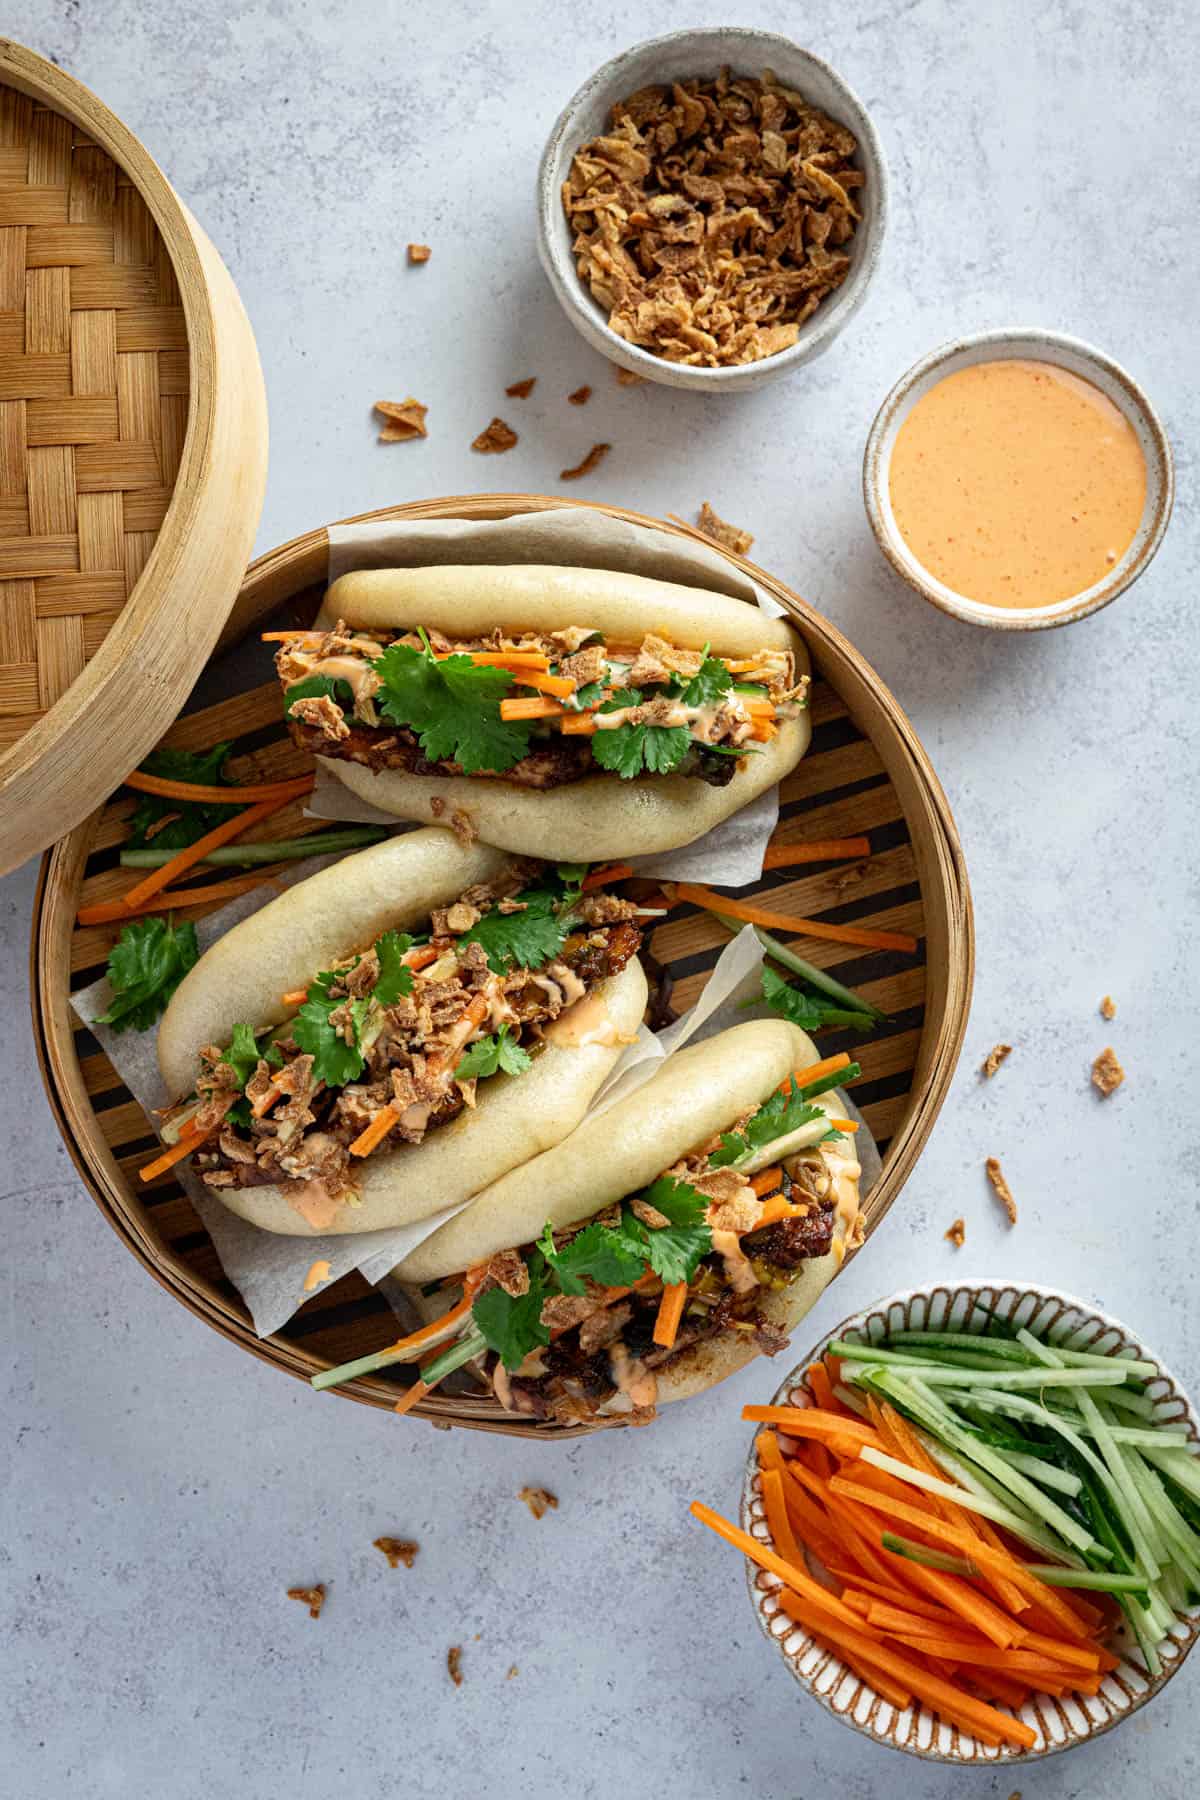 Three hoisin tofu bao buns in a bamboo steamer with bowls of ingredients.